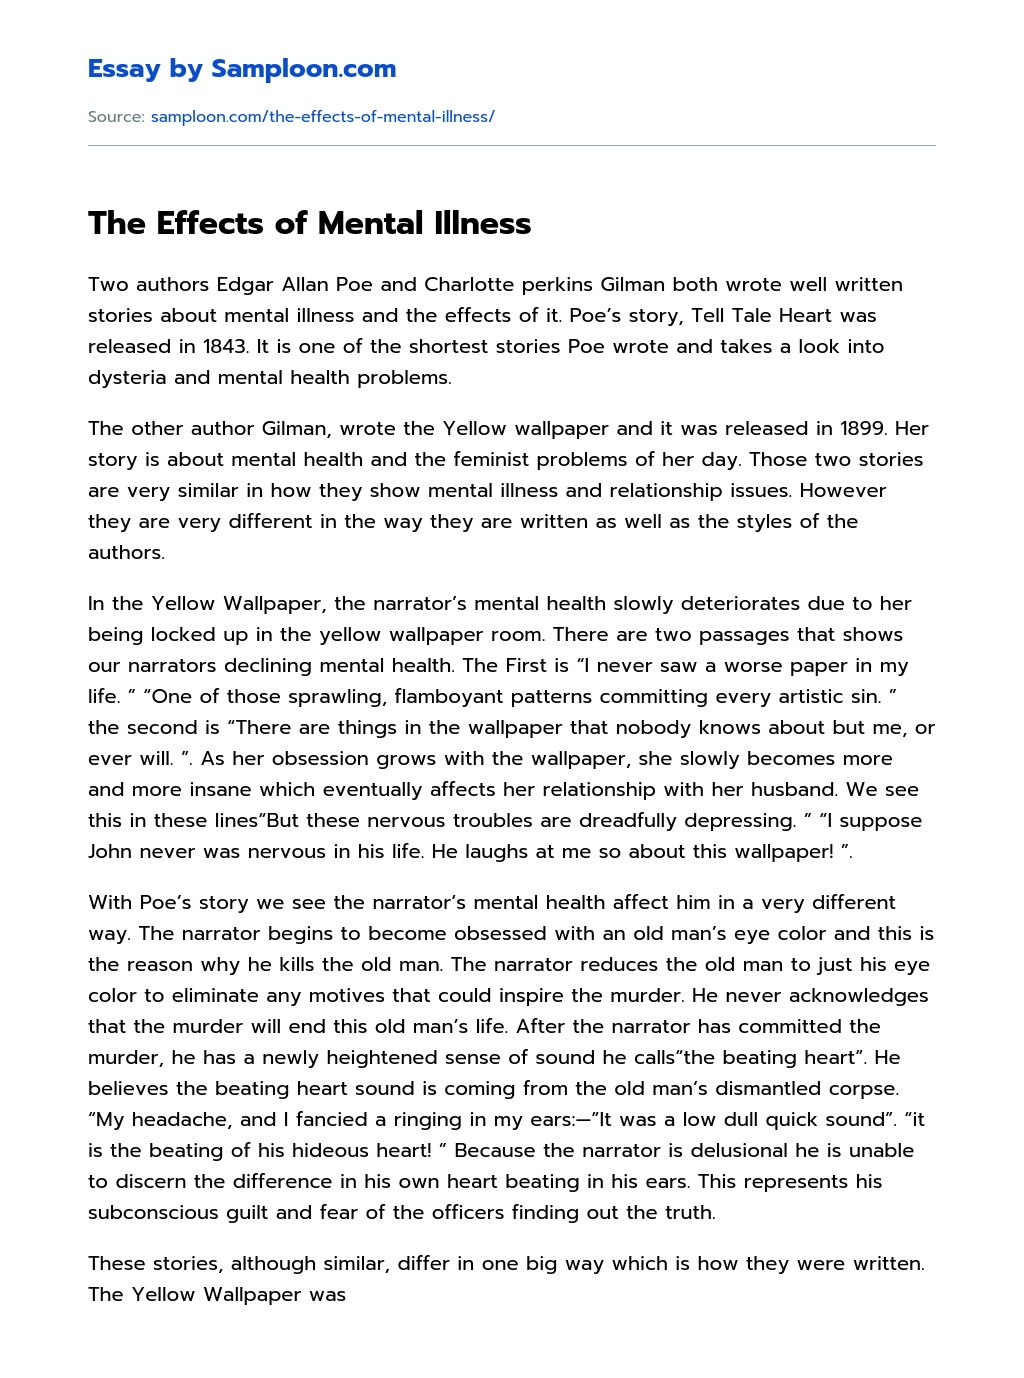 The Effects of Mental Illness essay